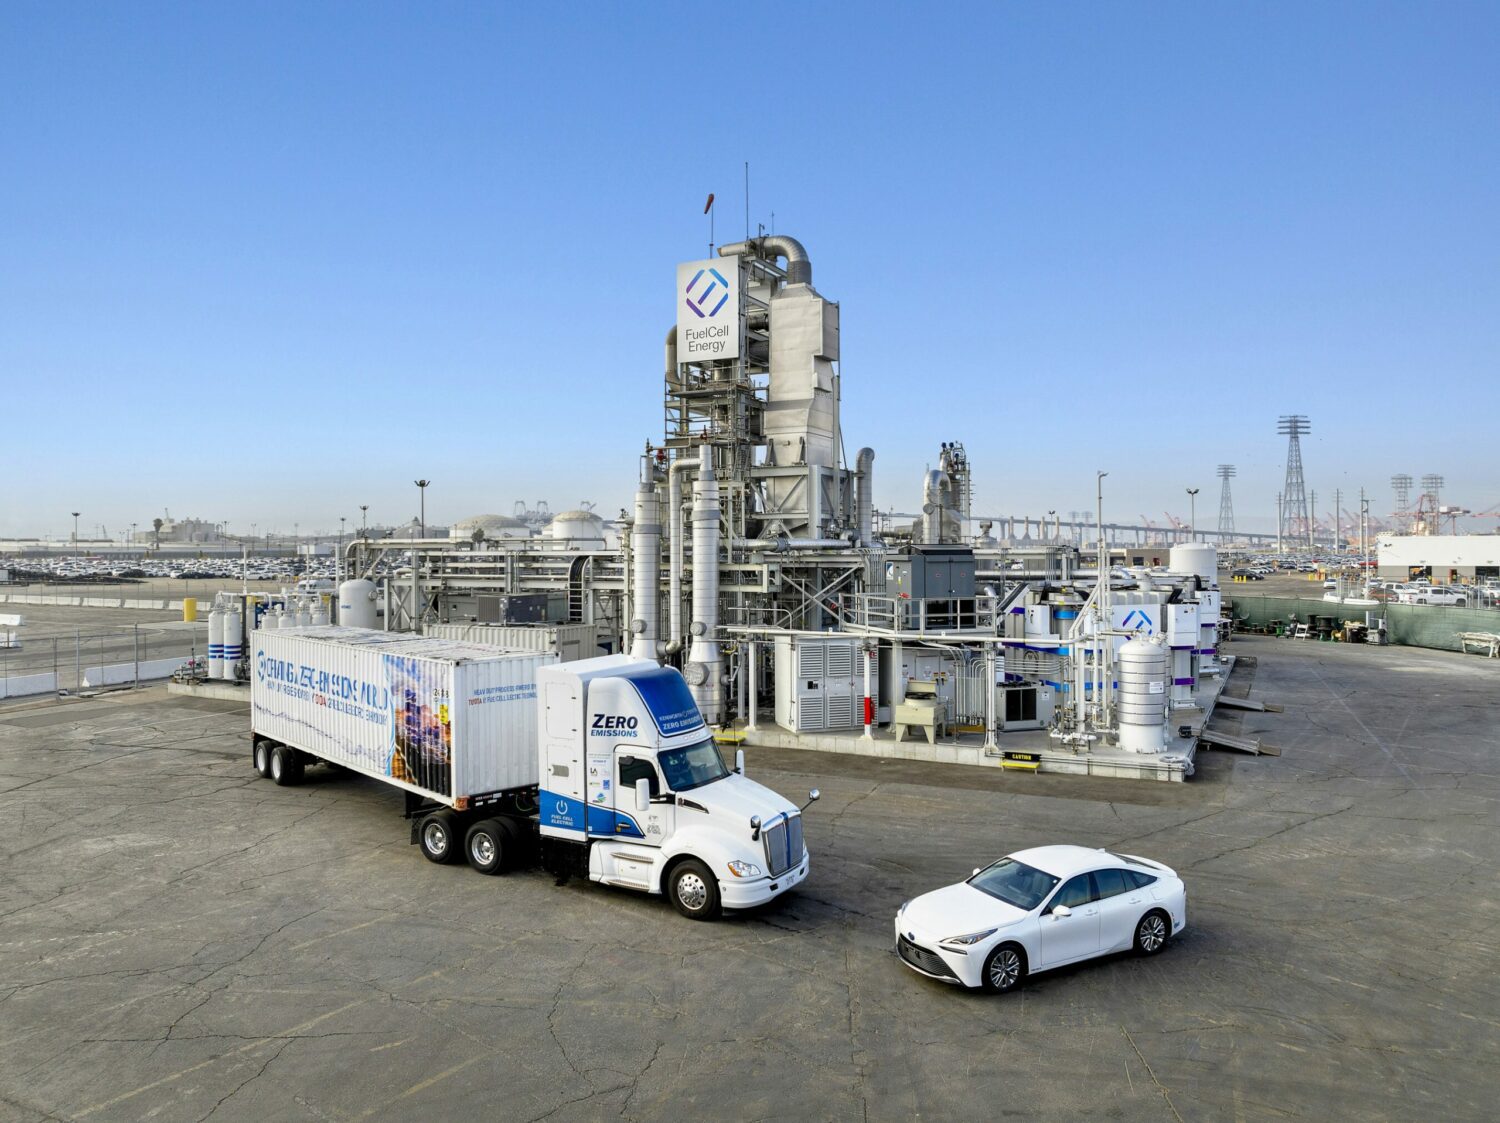 Toyota and FuelCell Energy have completed what they call a world first "tripartite system," Capable of producing renewable electricity.